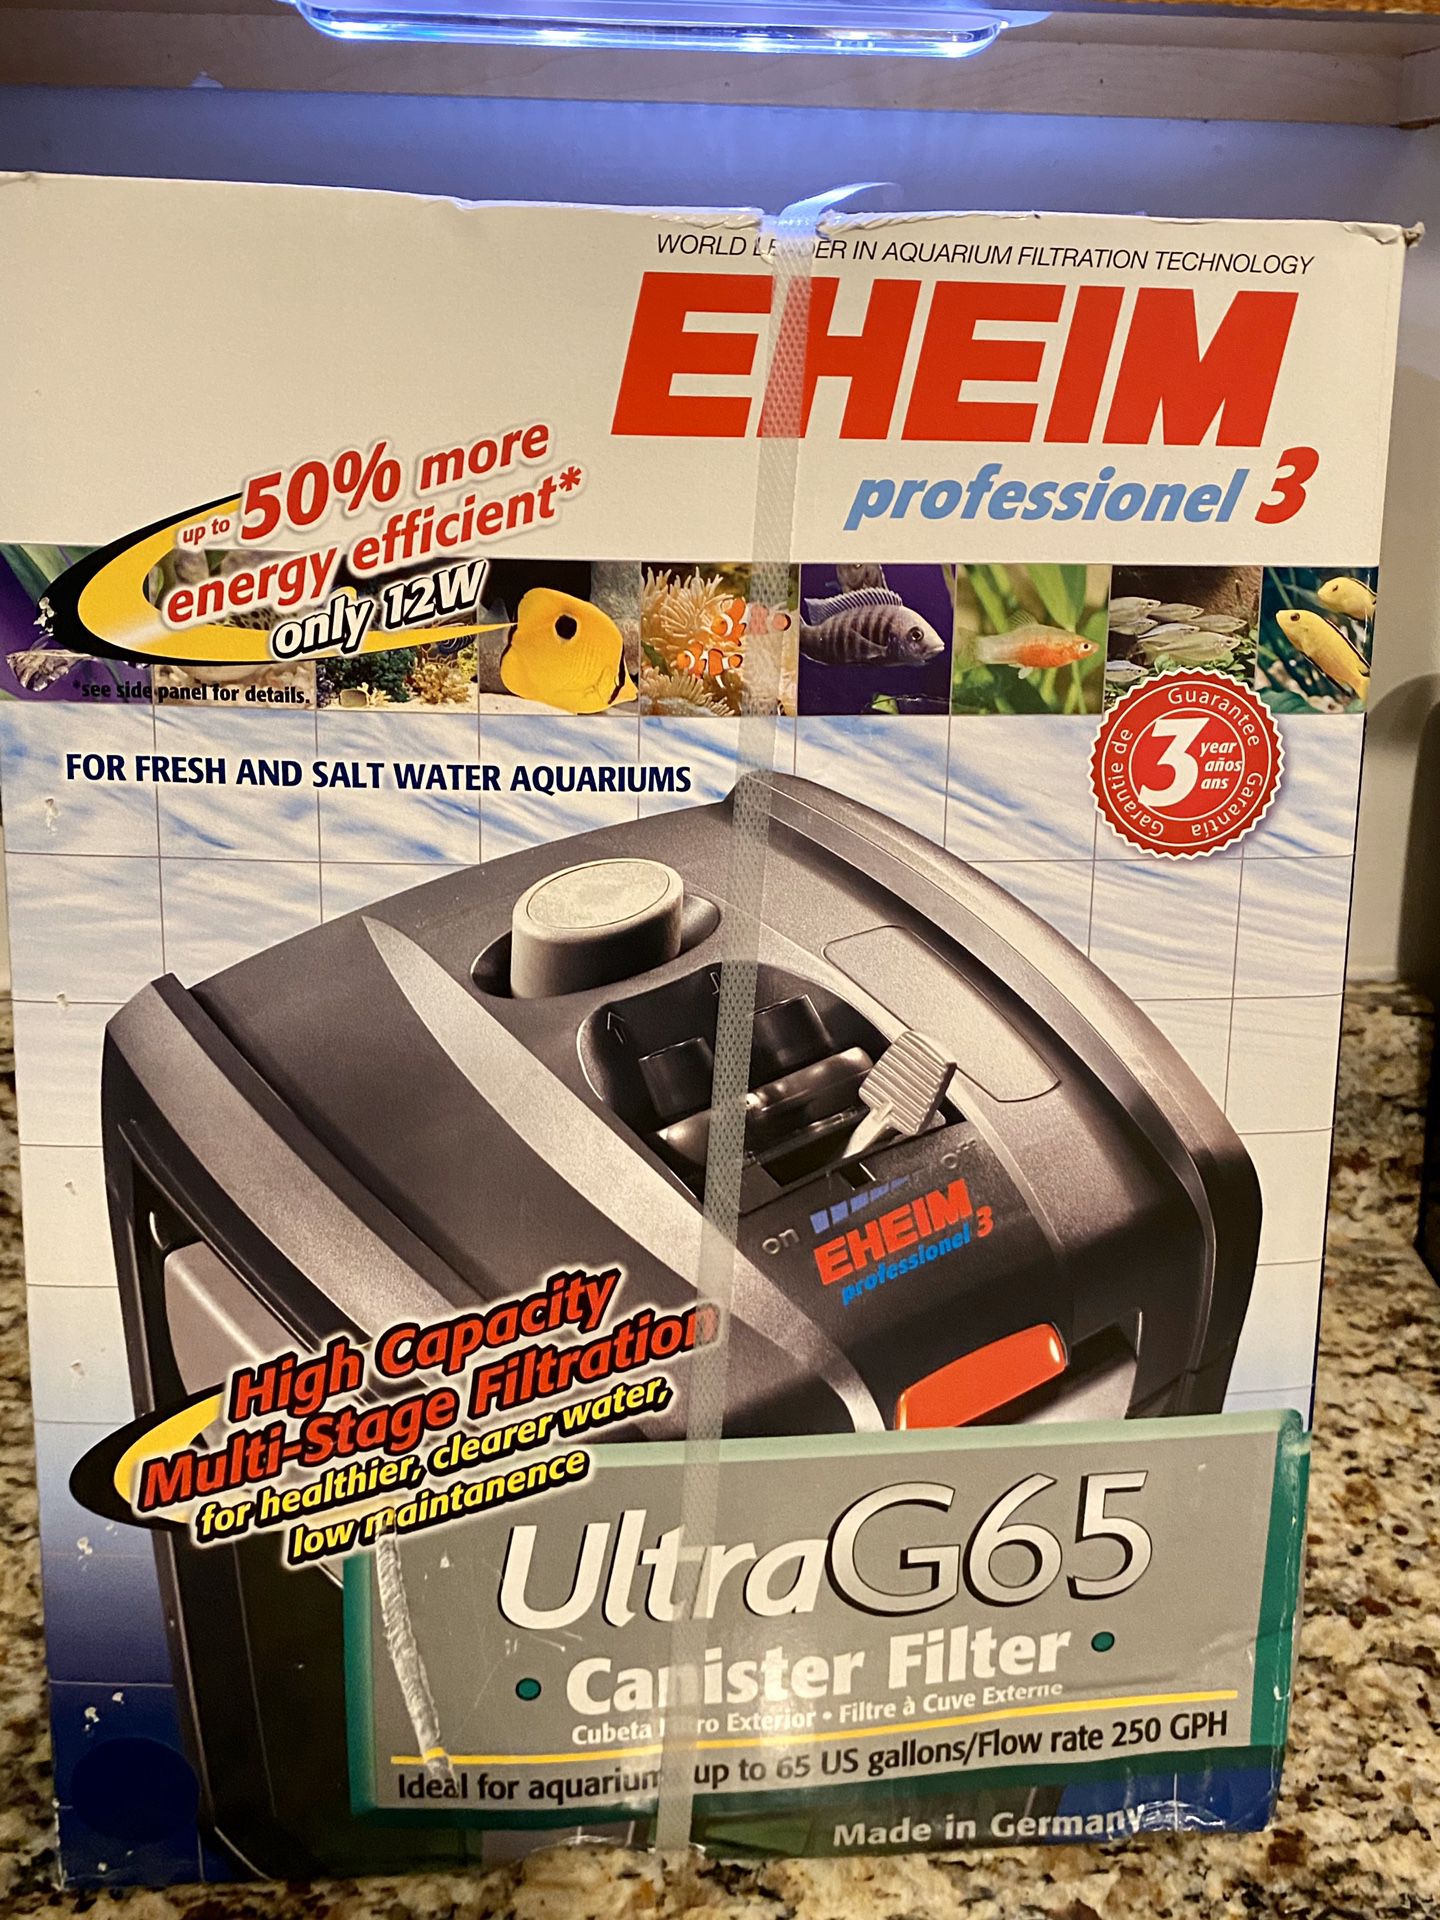 Eheim professional 3 g65 canister filter